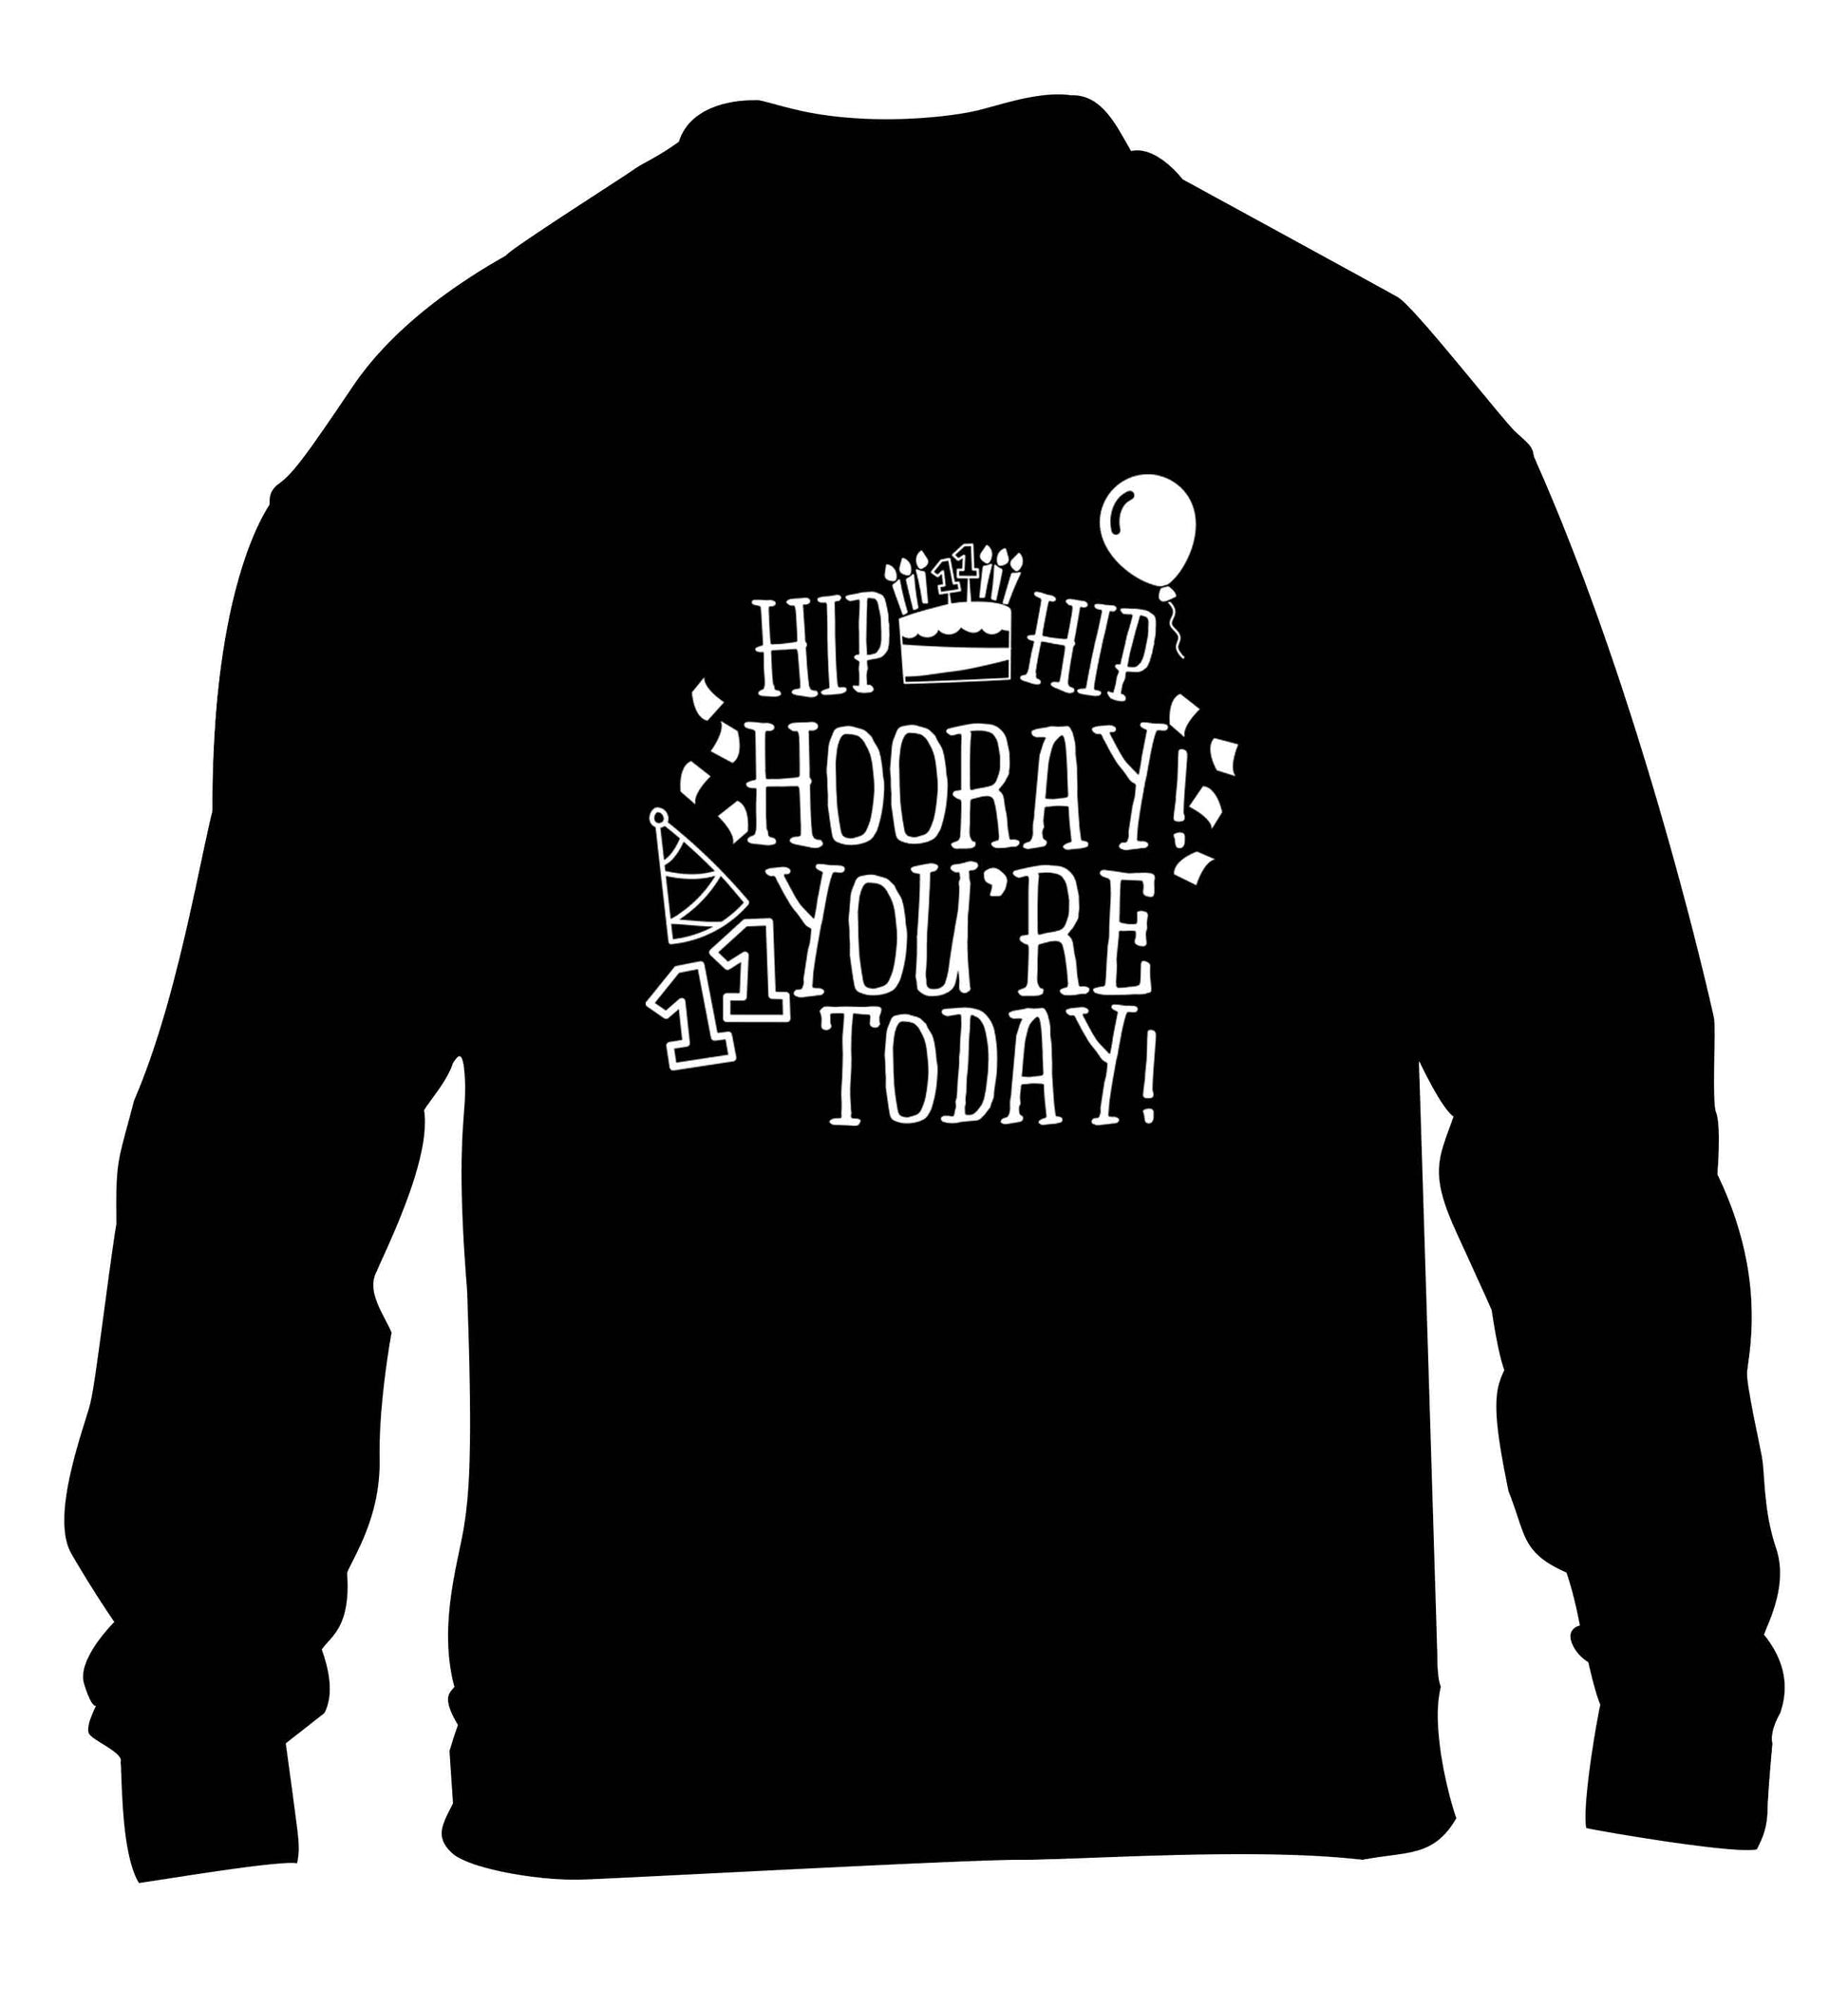 Hip hip hooray I you're eleven today! children's black sweater 12-13 Years